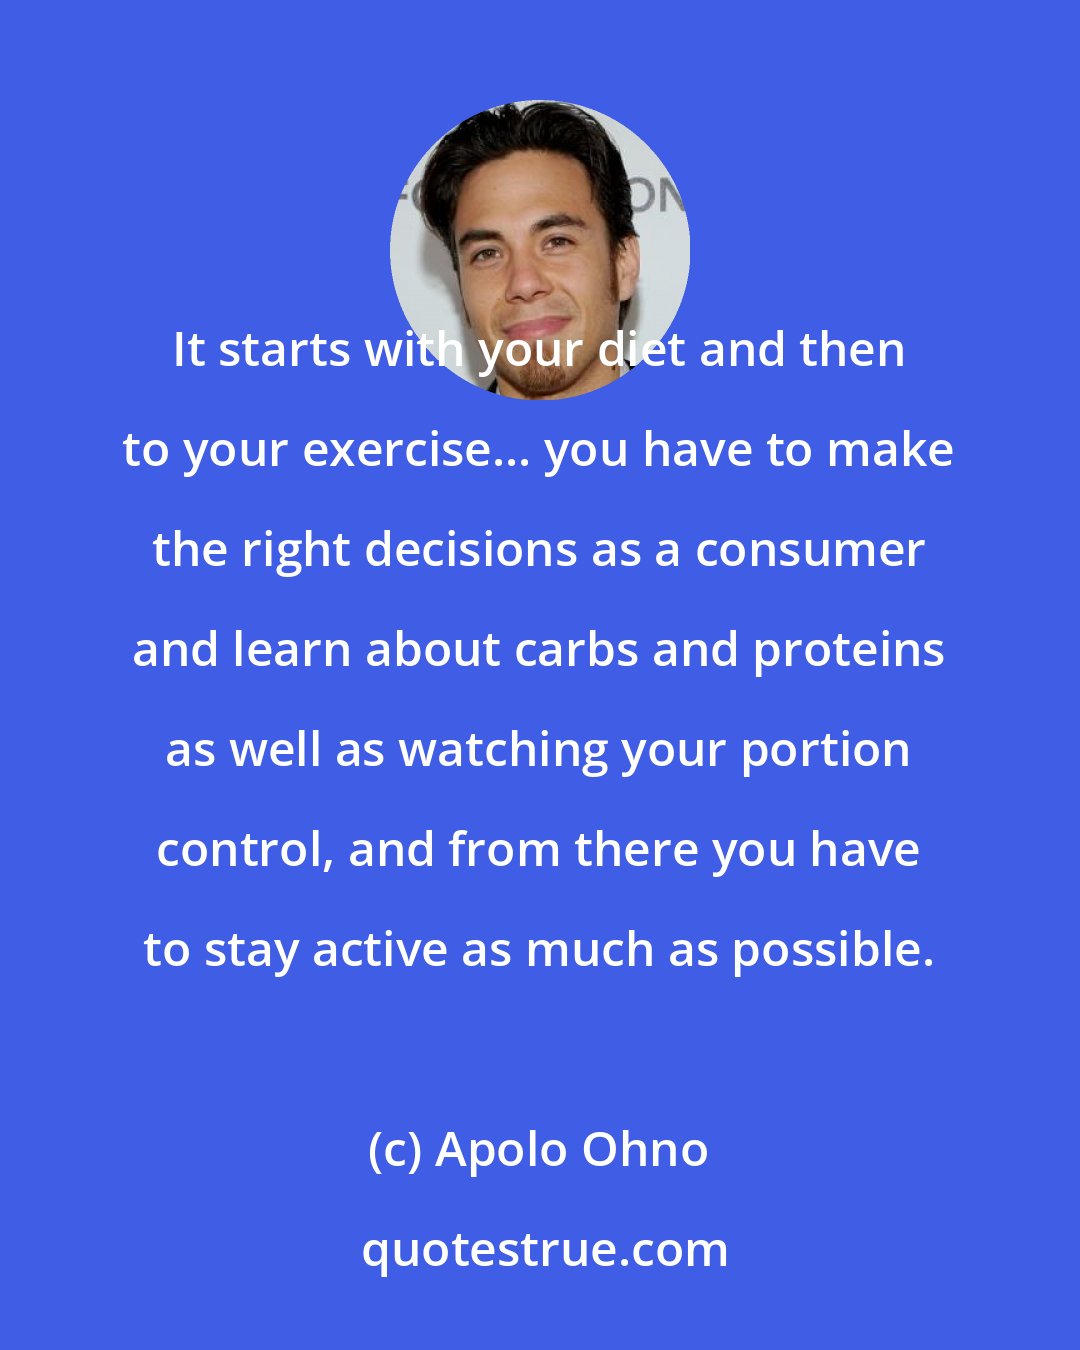 Apolo Ohno: It starts with your diet and then to your exercise... you have to make the right decisions as a consumer and learn about carbs and proteins as well as watching your portion control, and from there you have to stay active as much as possible.